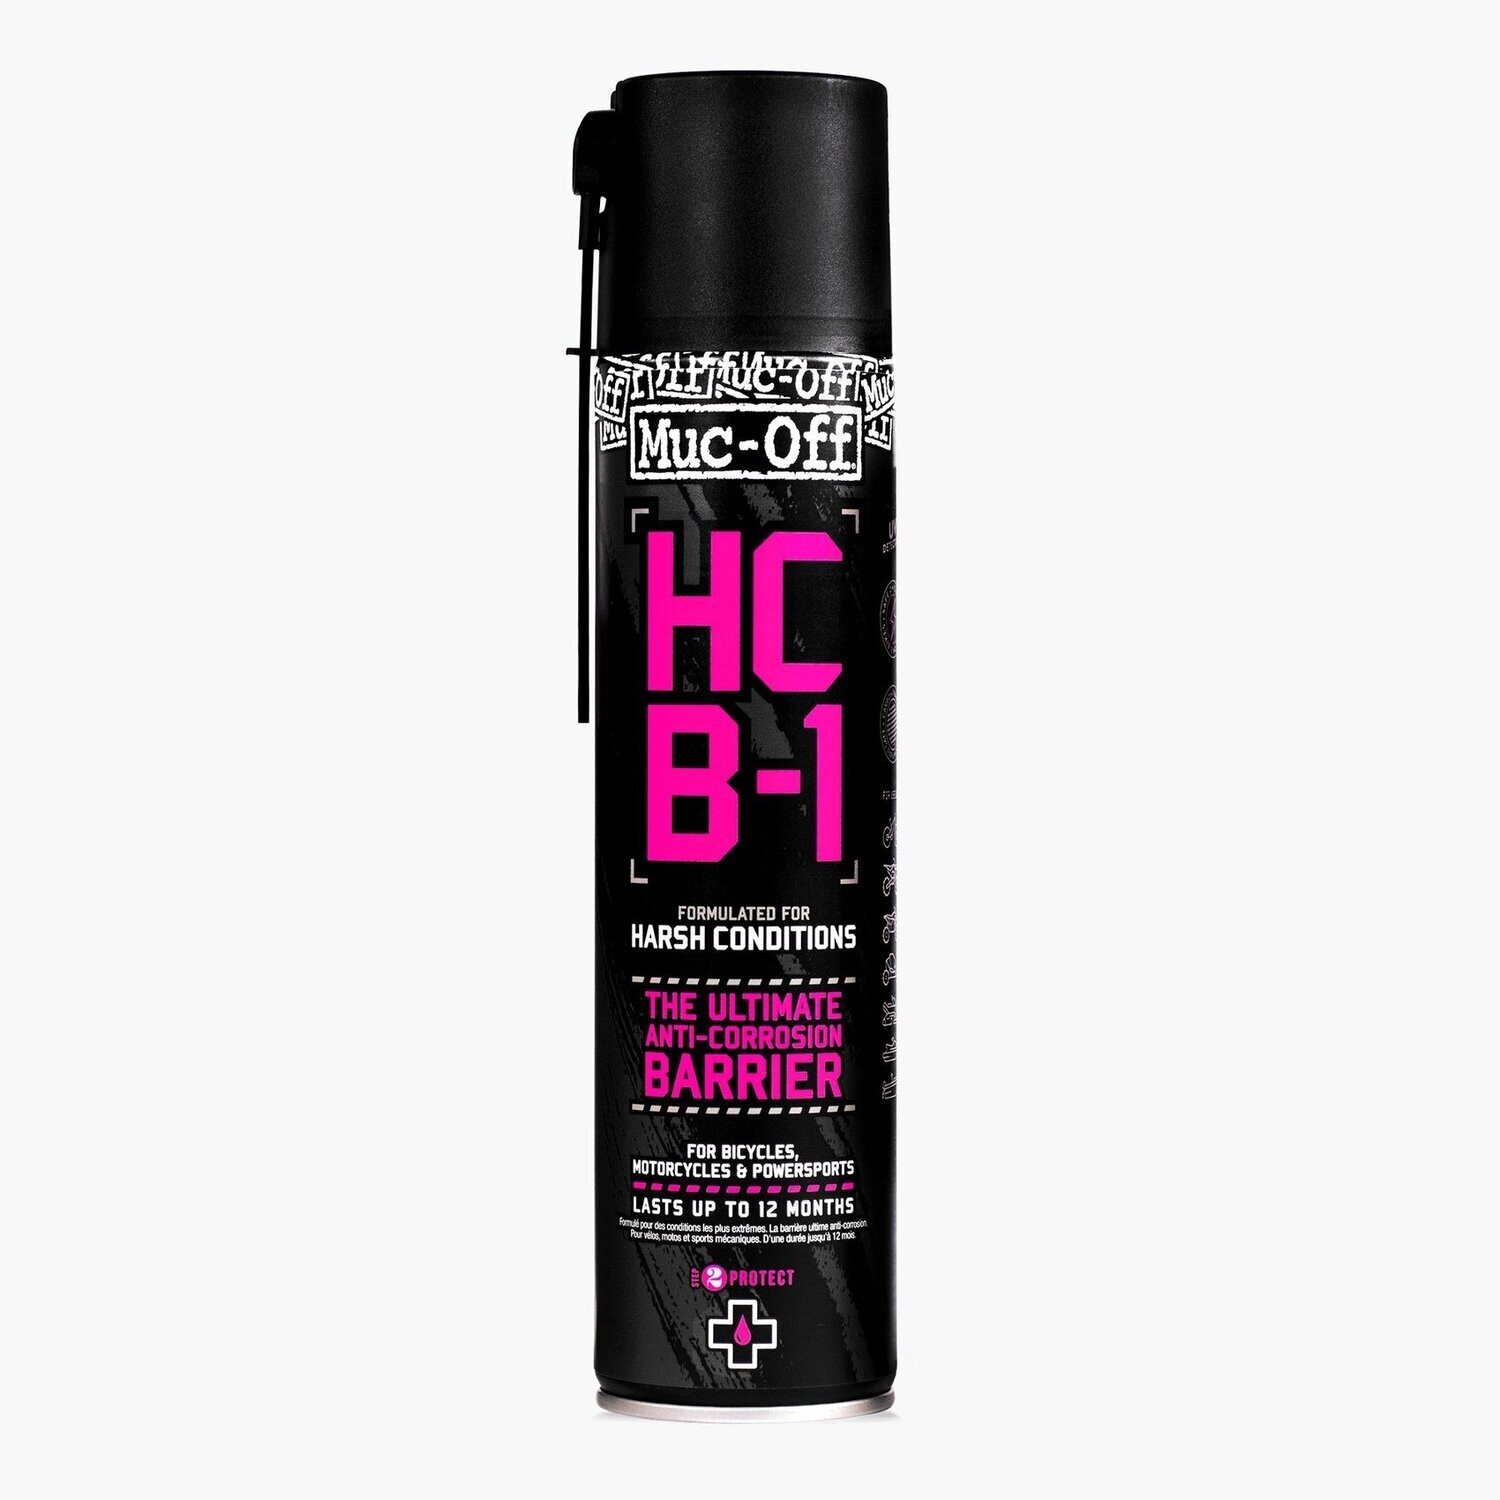 Muc off Harsh Condition Barrier HCB-1